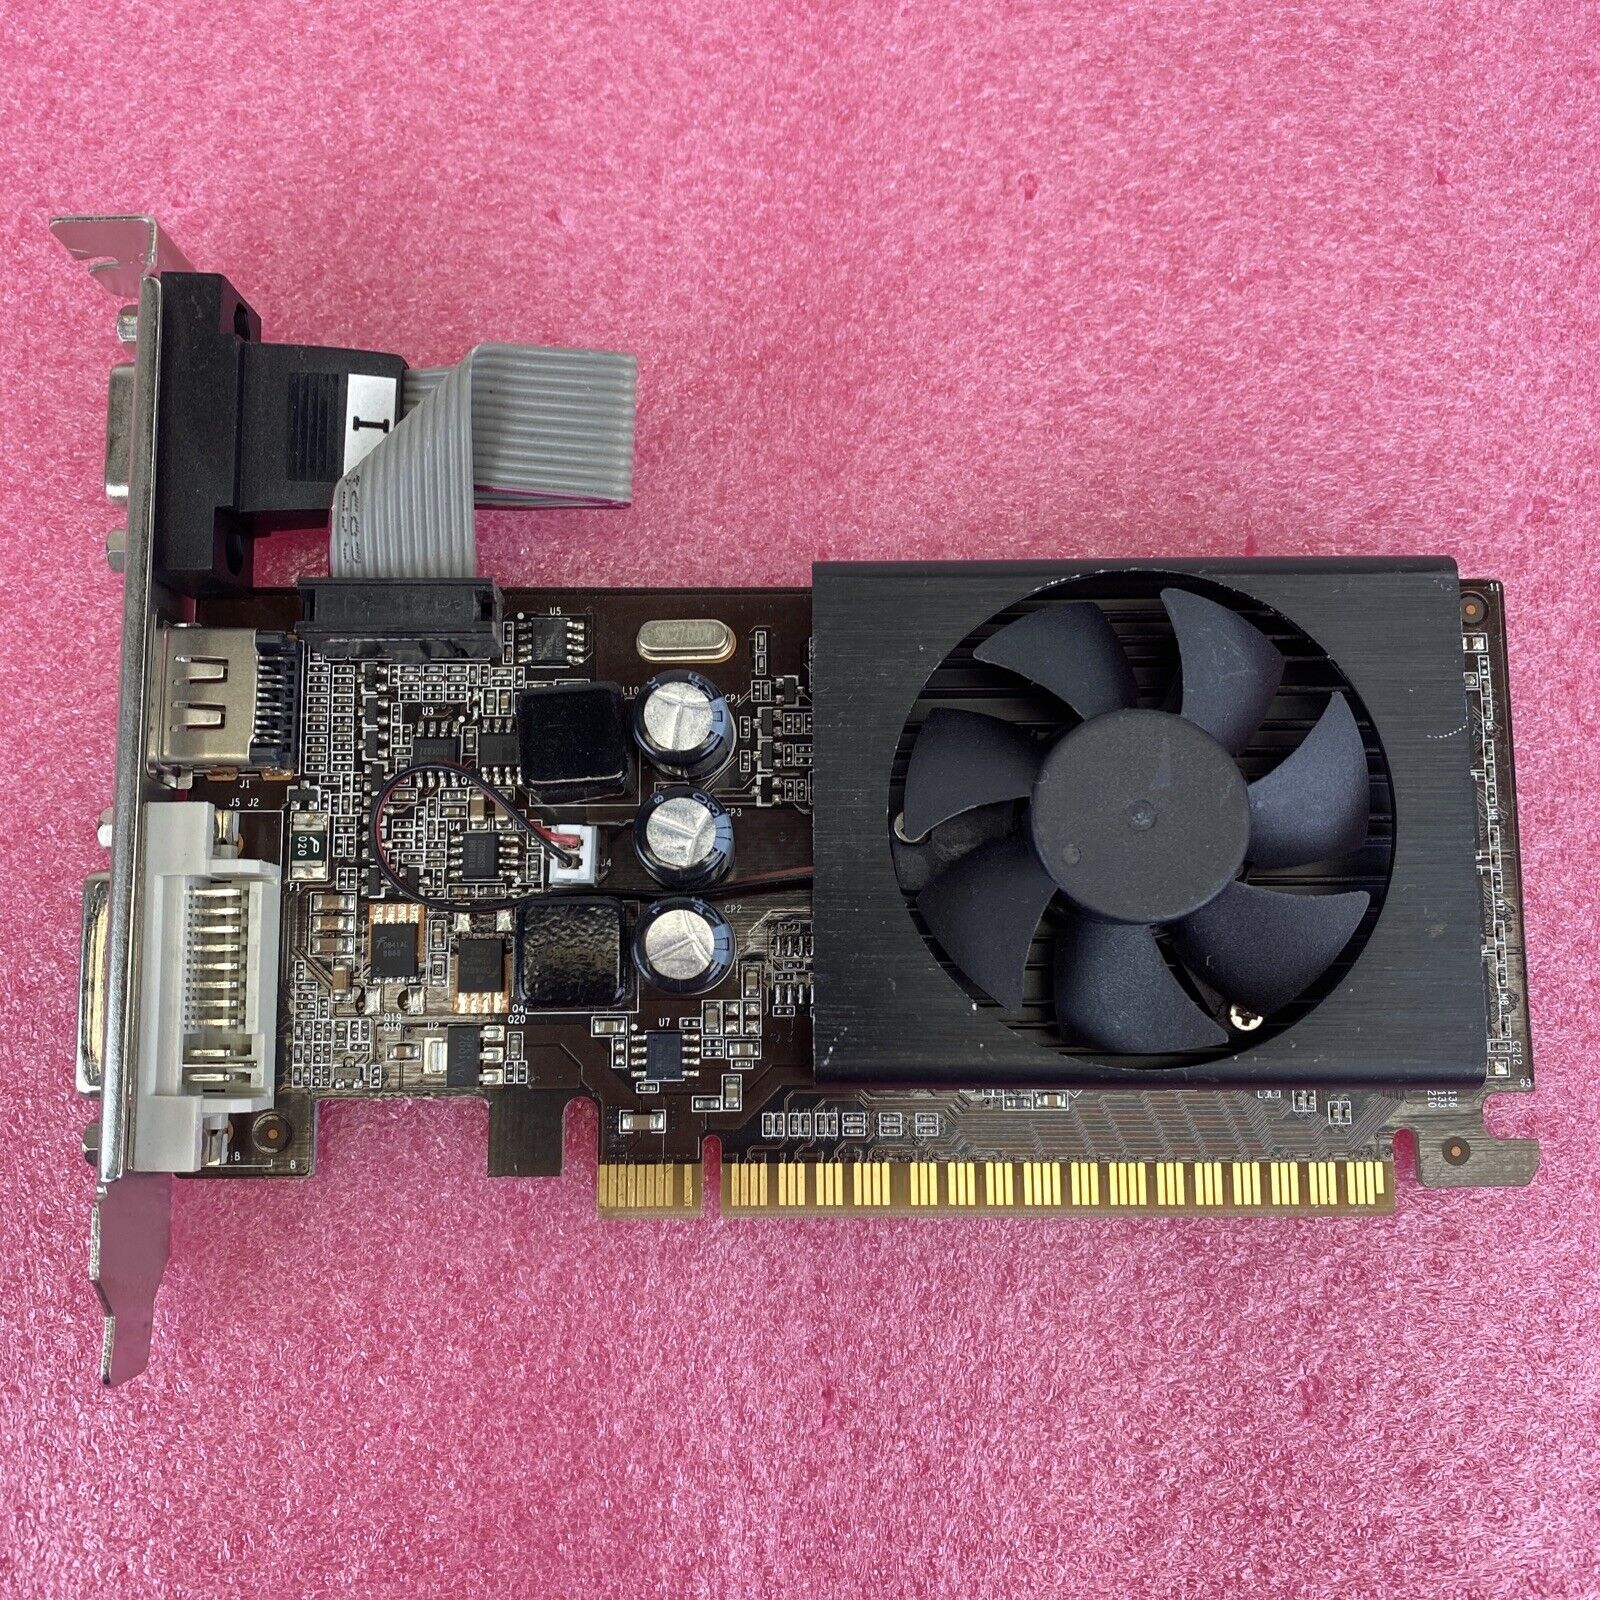 PNY GMG210WN2F1EH-0TP40Q0 GeForce GT520 1024MB DDR3 PCIE video graphics card